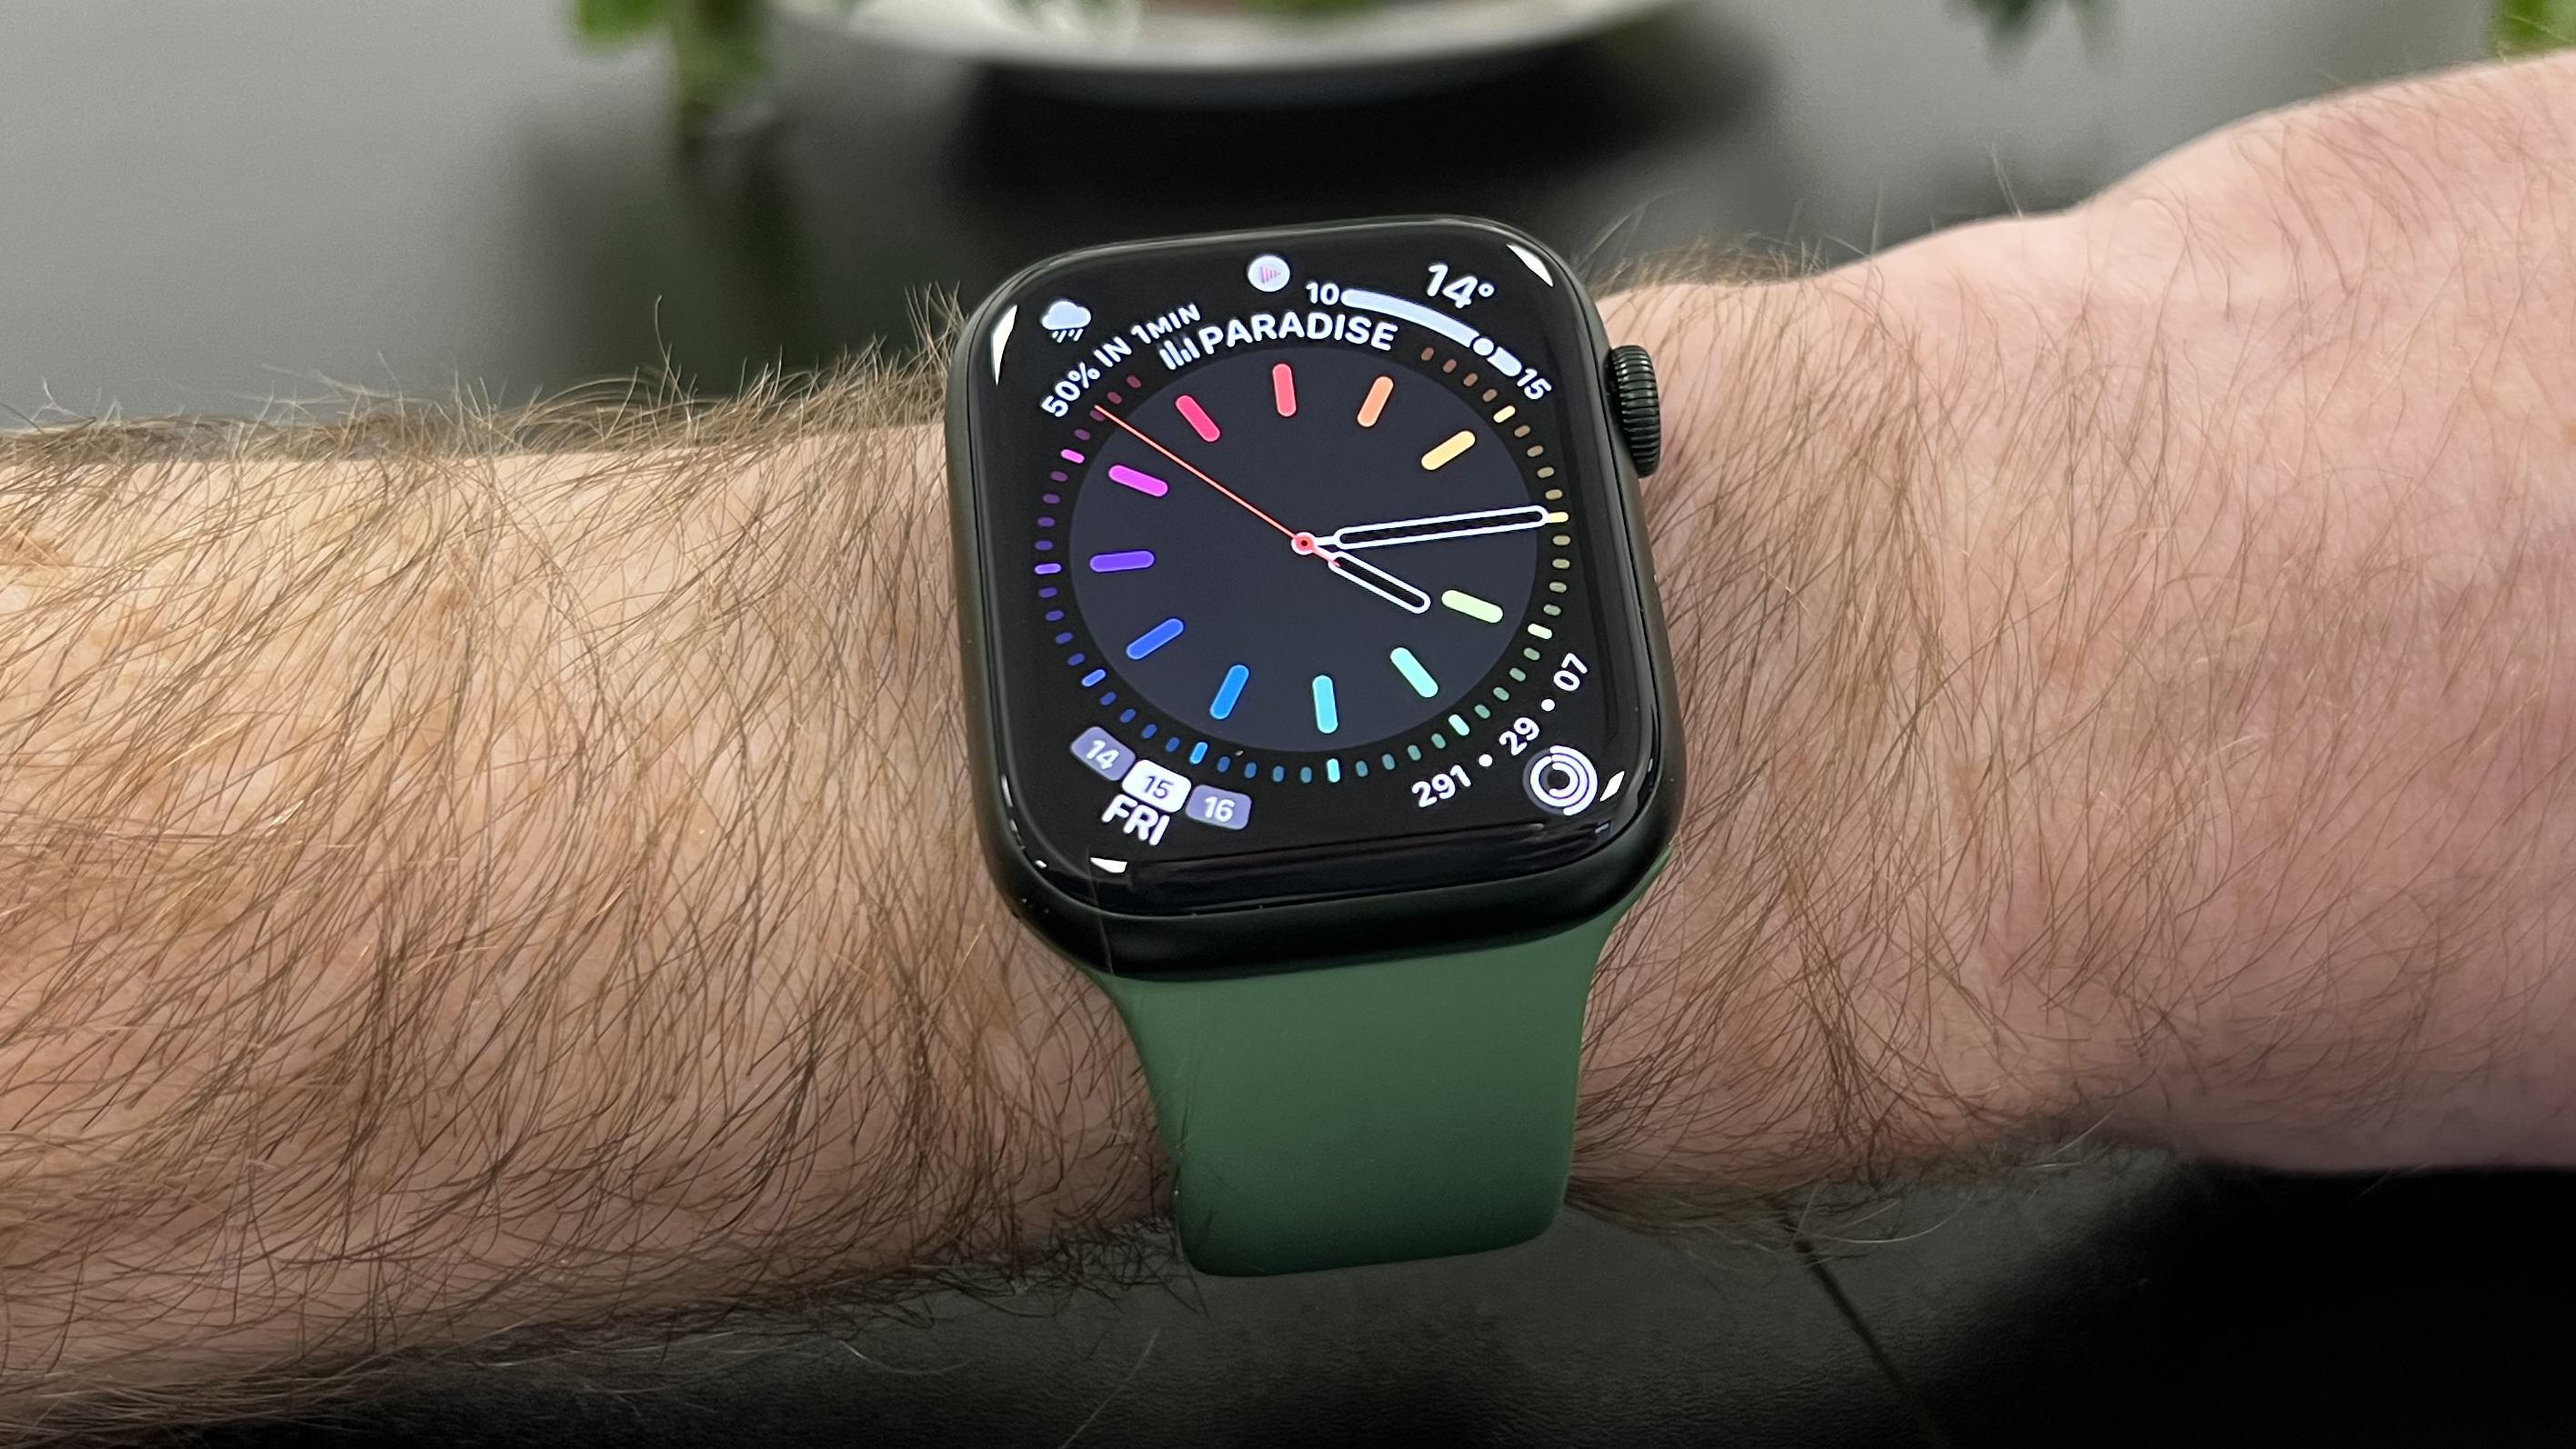 Apple Watch Series 7: 6 Months Later, I'm Still Loving the Bigger